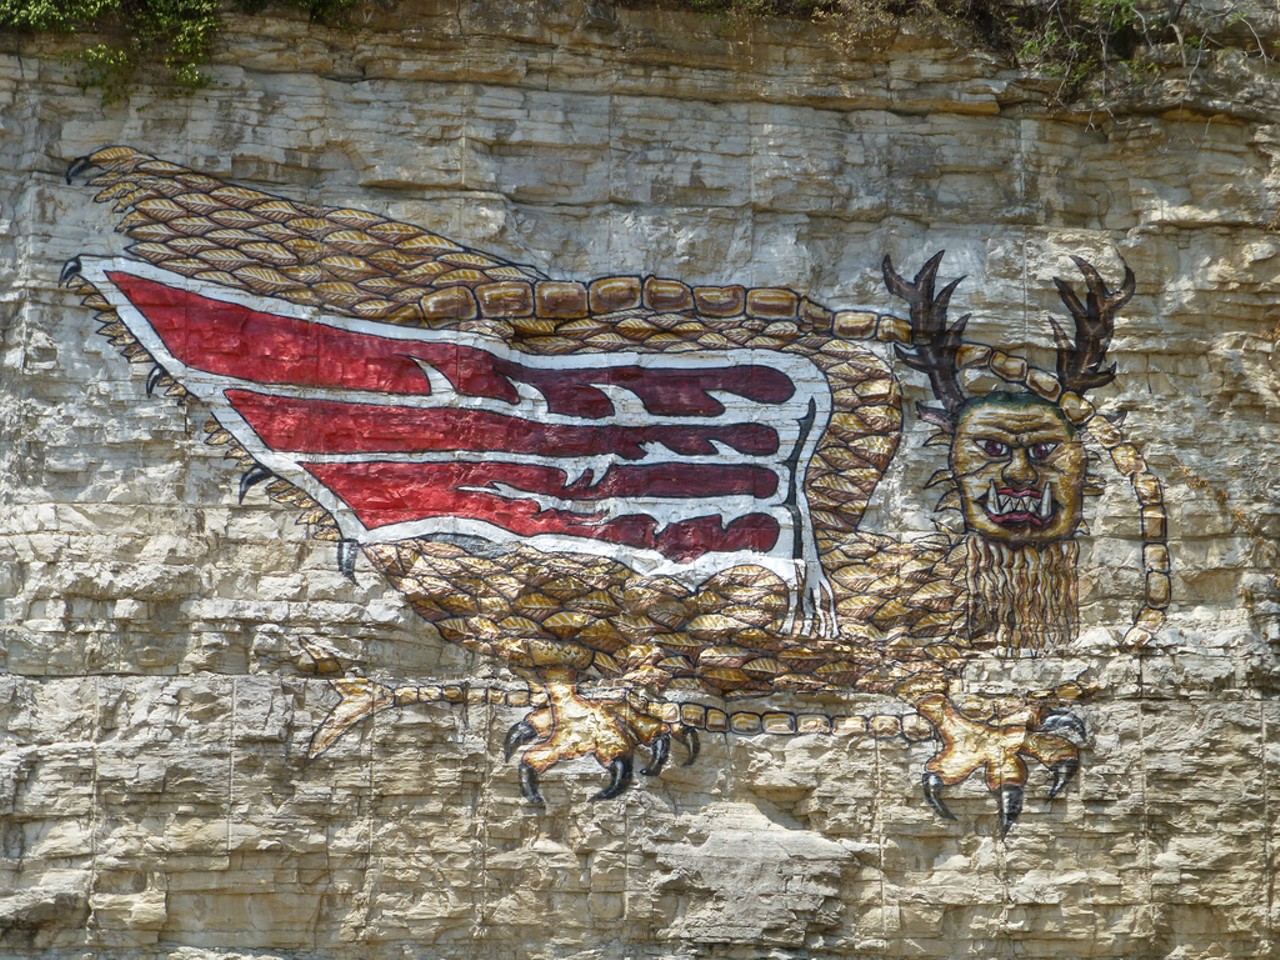 The Piasa Bird
Sam Vadalabene Great River Road Bike Trail, Alton, IL 62002
The history of this mythical Illini native tale continues today. Legend has it that many years ago there was a great winged creature who was so big that he could swoop down out of the sky and snatch up a full-grown deer -- and certainly snack on a human as well. You can find an image the creature painted on the bluffs along the Mississippi River in Alton, IL and read all about him here.
Photo courtesy of Mike Linksvayer / Flickr